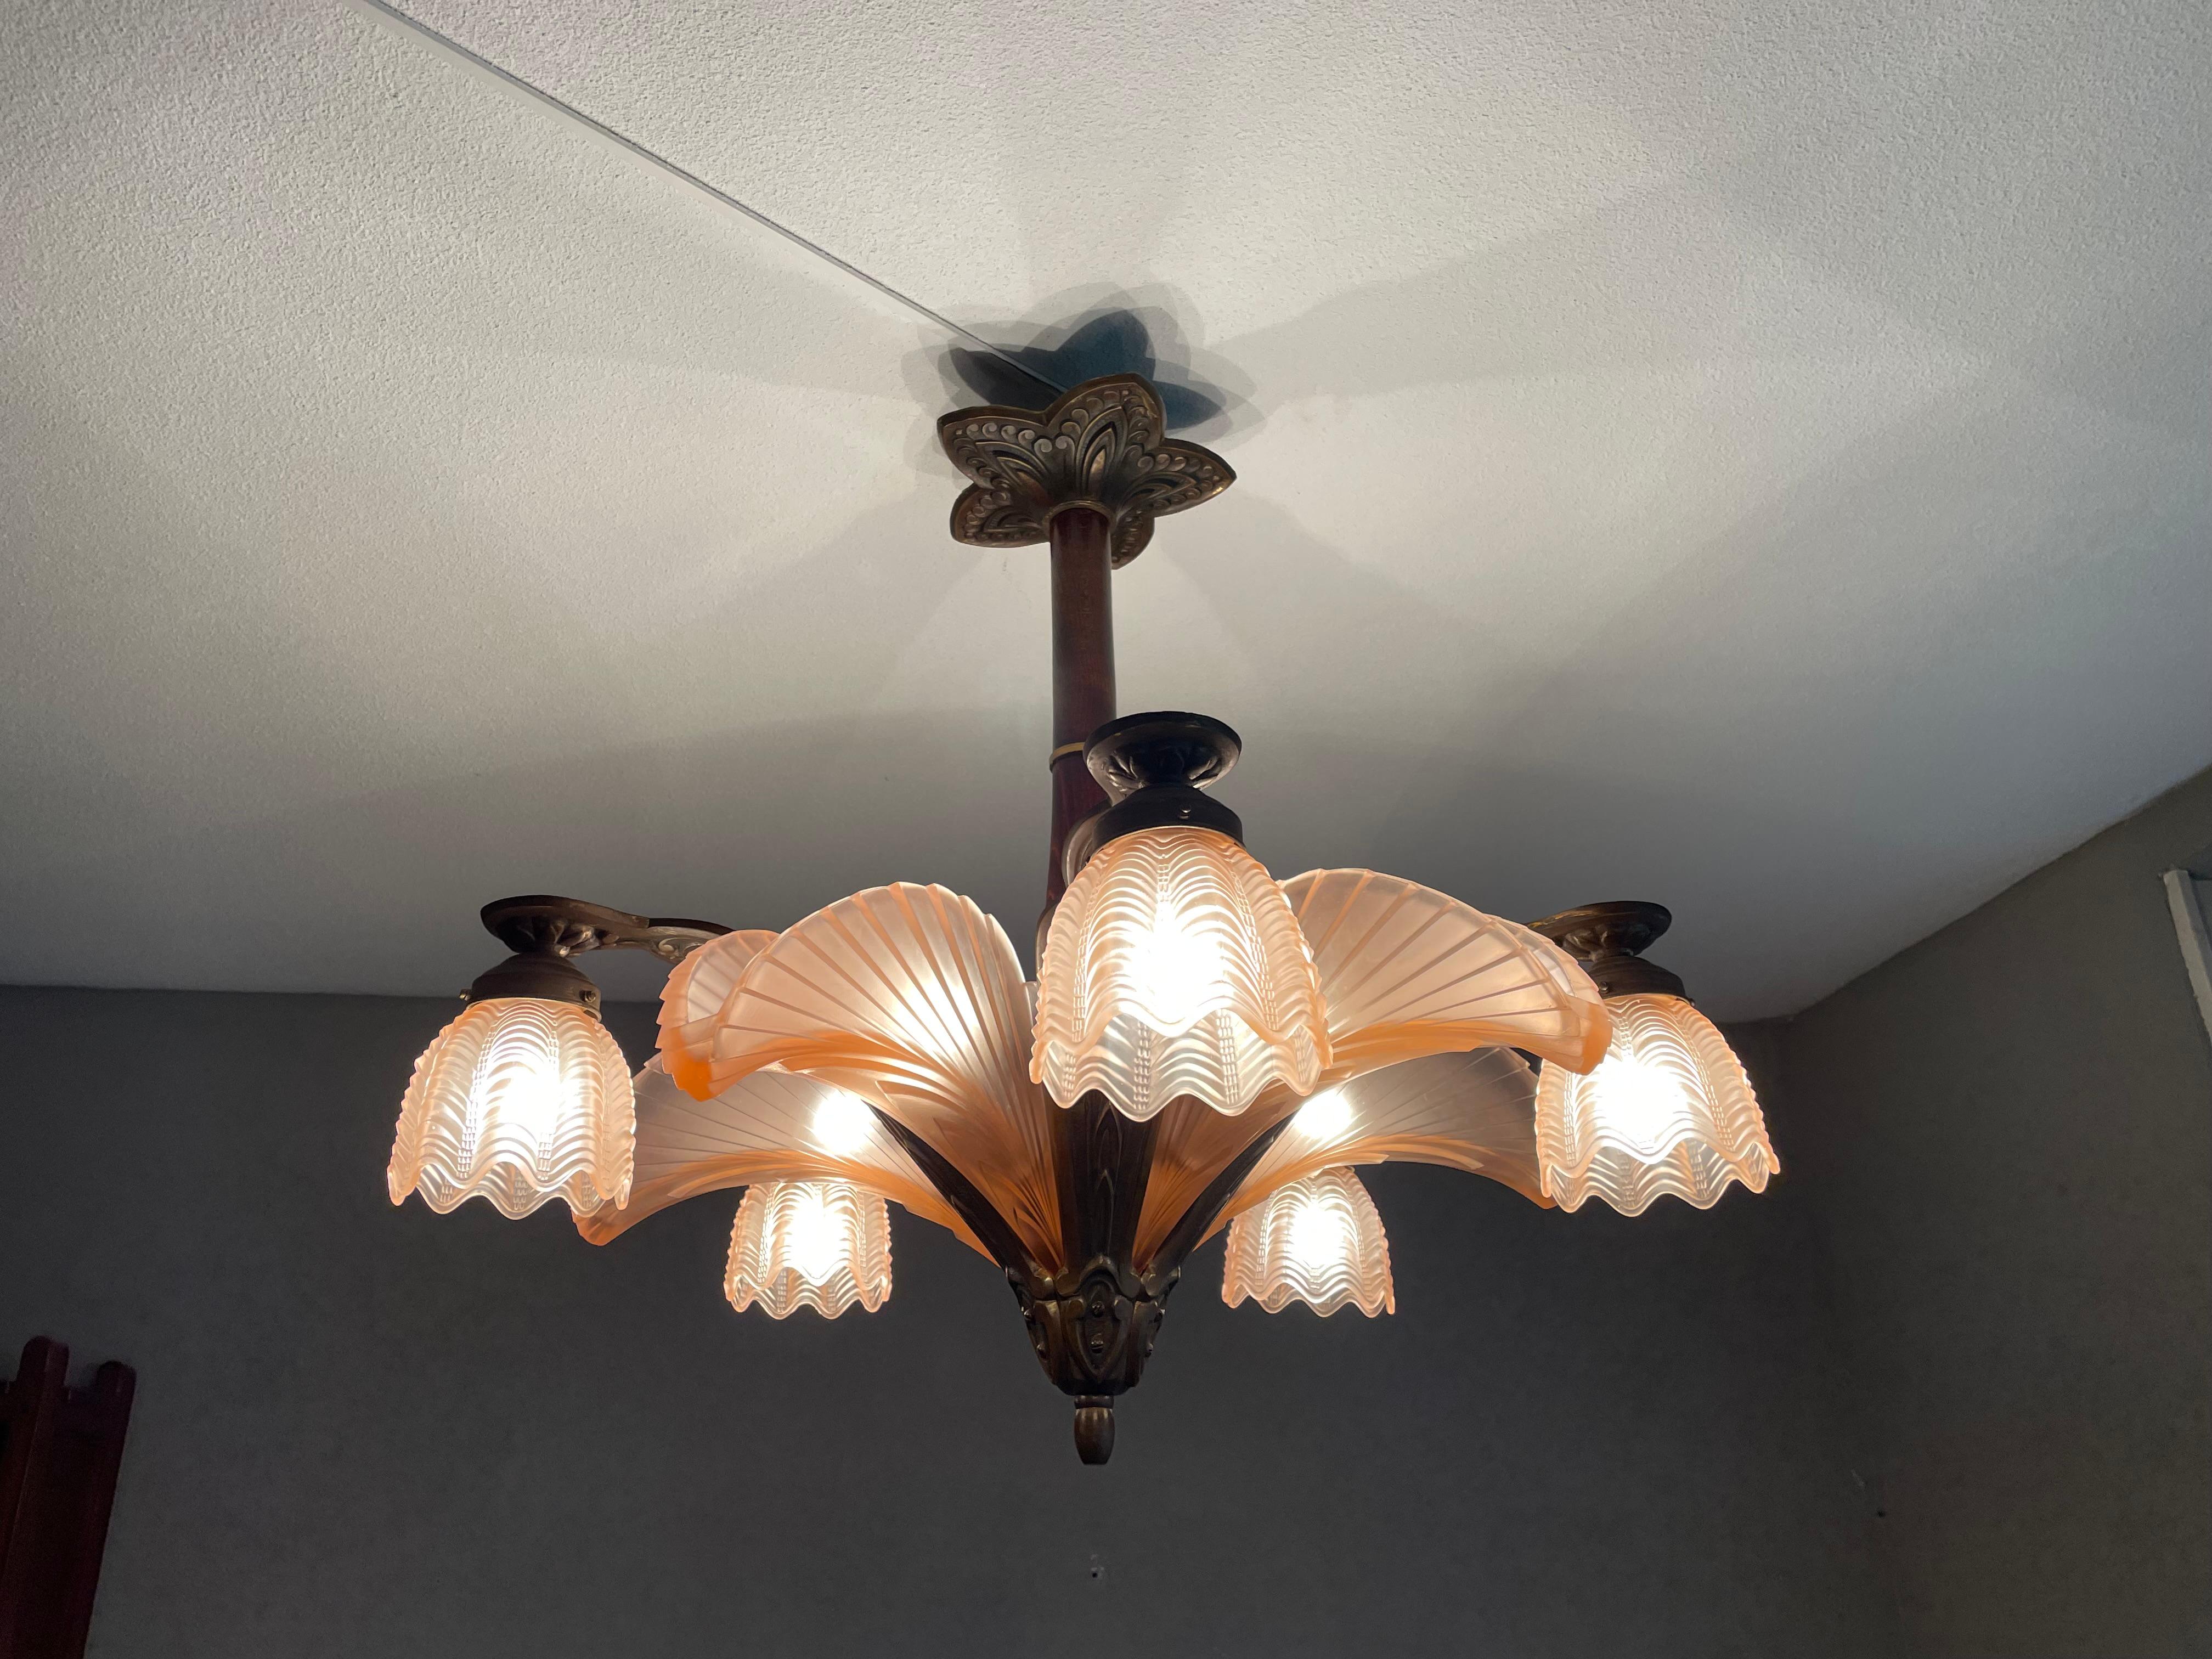 Top quality and practical size, ten-light Art Deco pendant.

This highly stylish Art Deco light fixture was handcrafted in Belgium and we think it was made by Verrerie Belge. The stunning Art Deco design and the quality of the materials lead us to